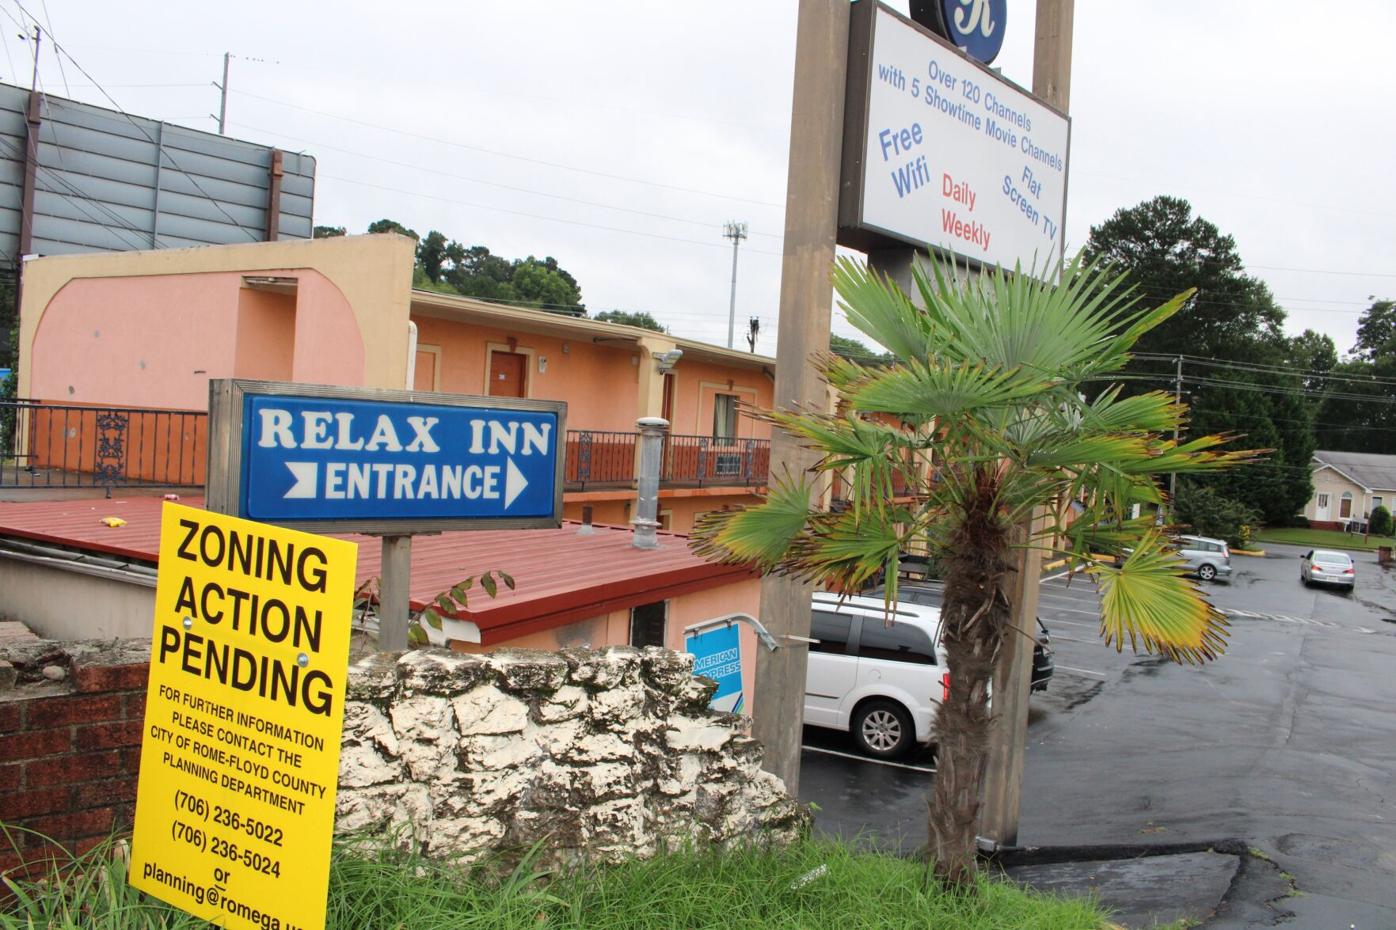 Rome's notorious Relax Inn is officially closed